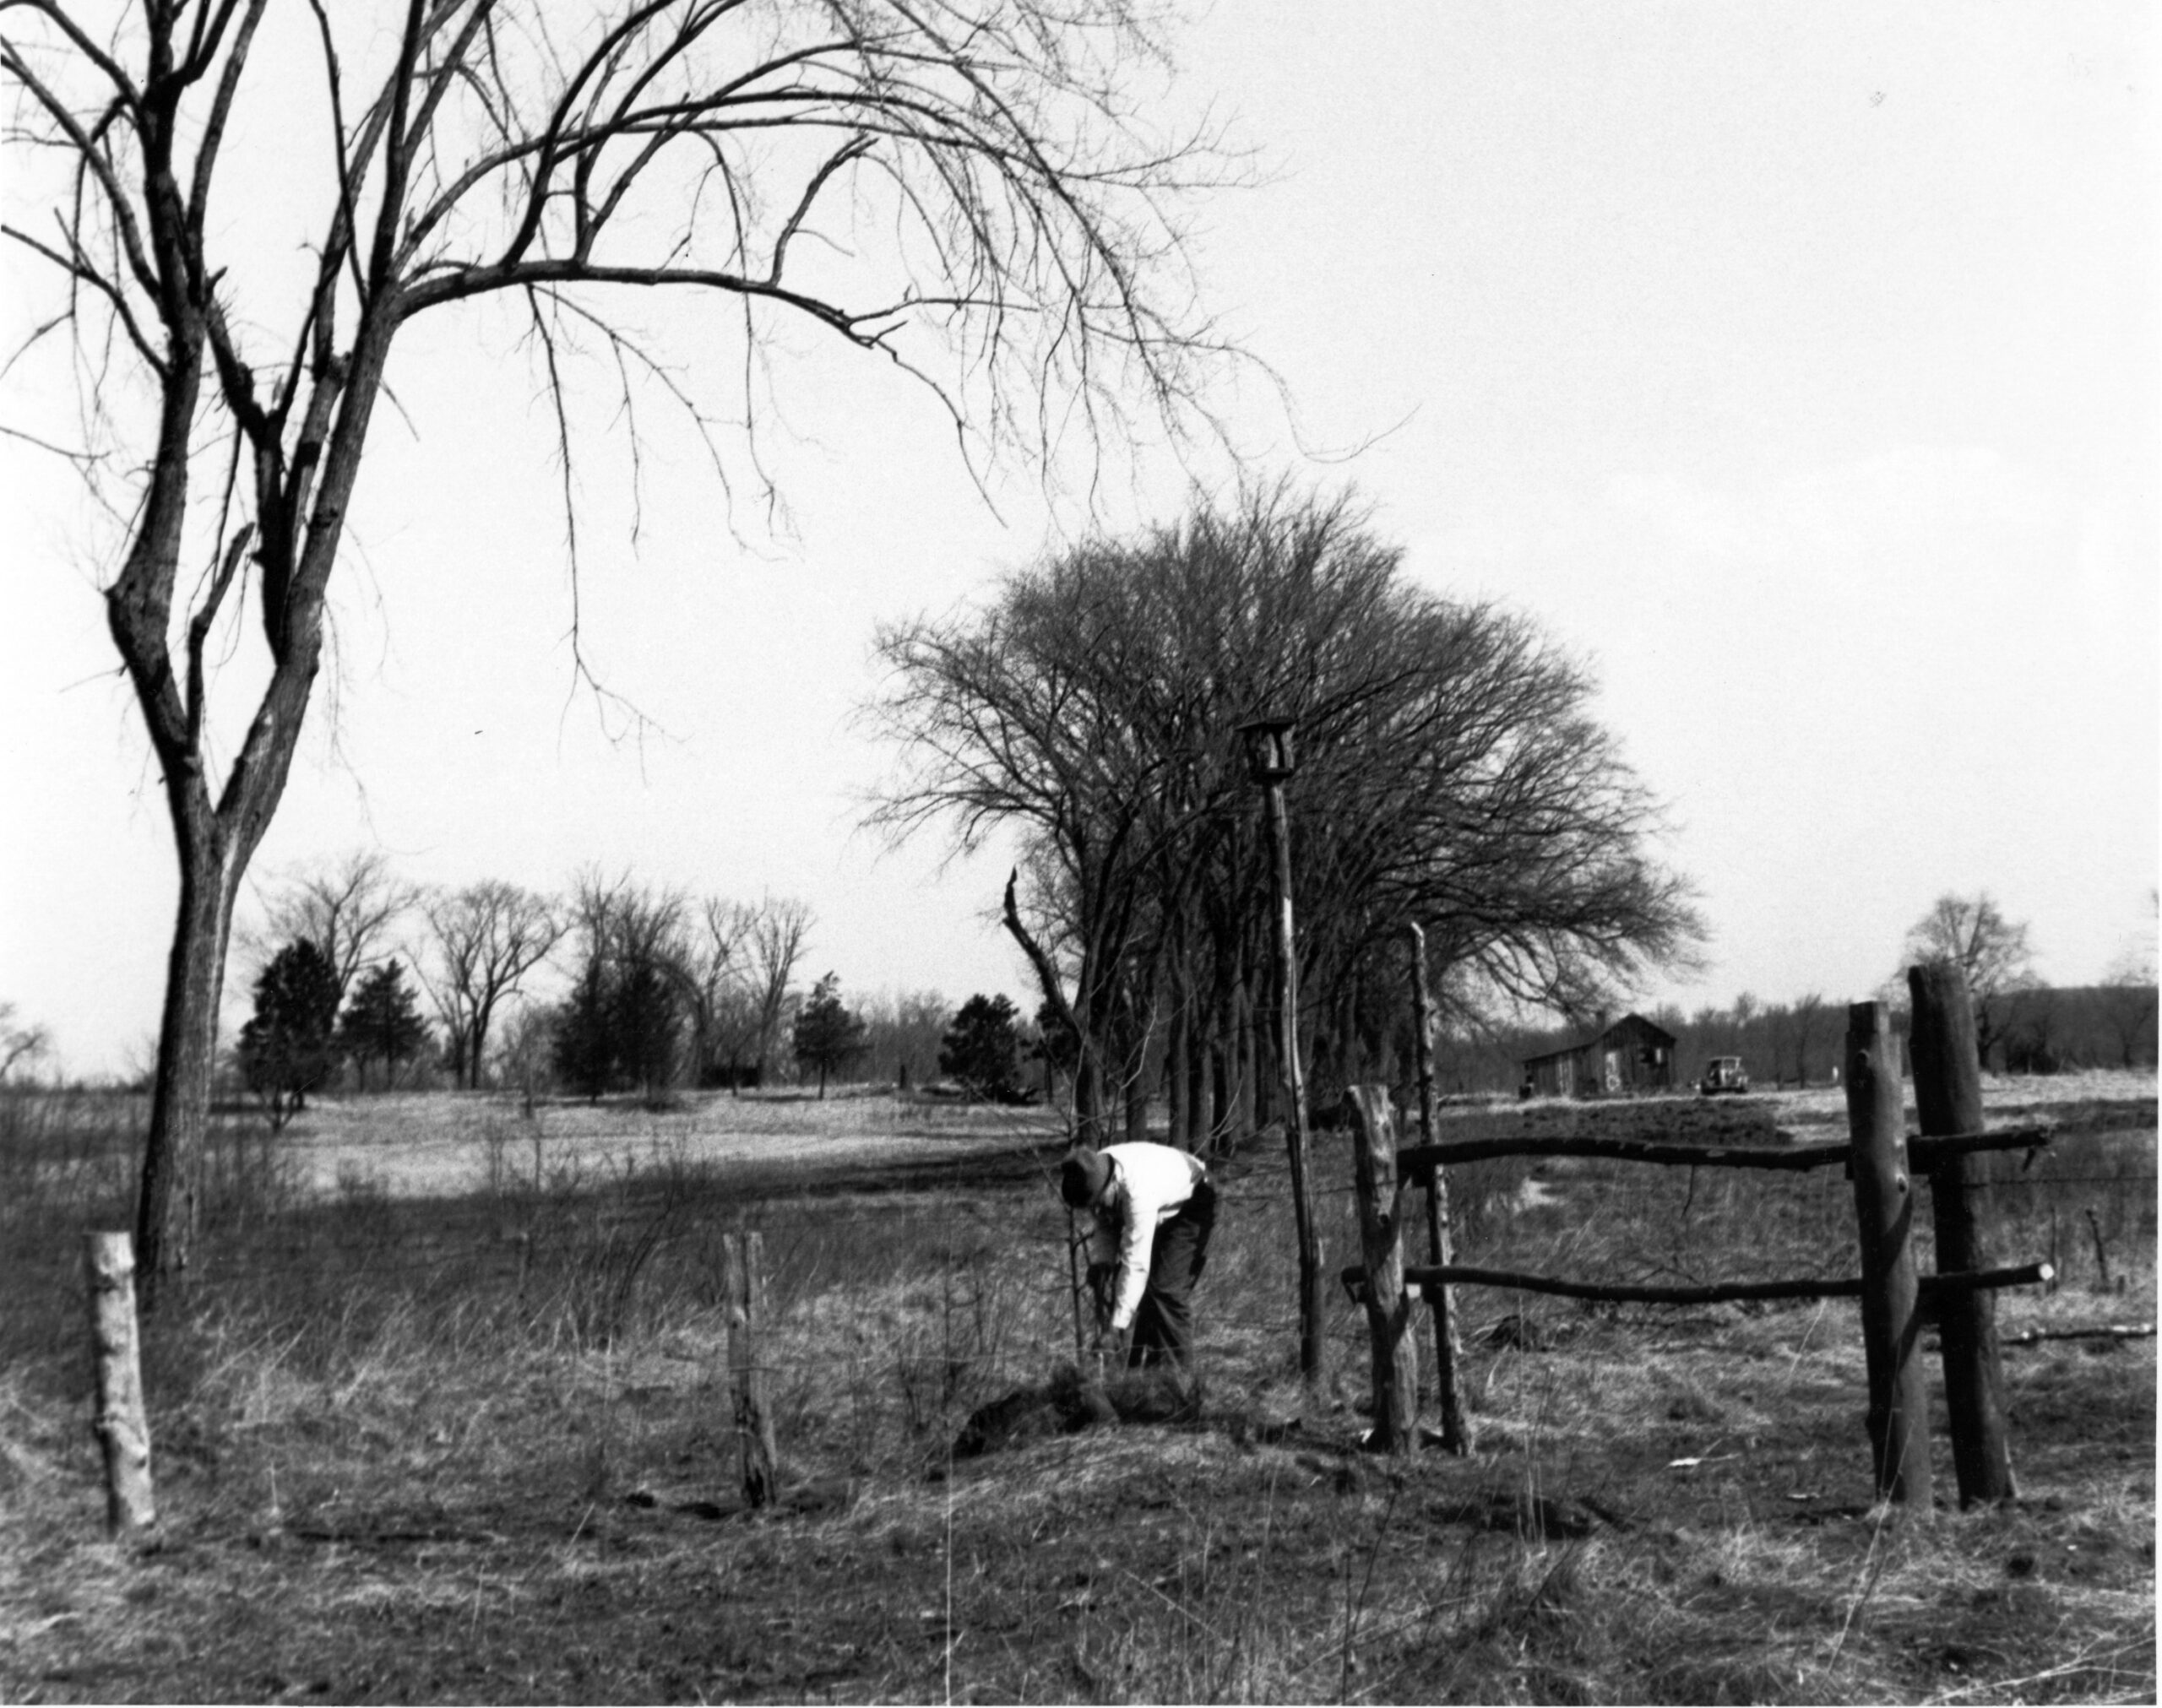 Aldo Leopold planting a tree at the Shack in Baraboo